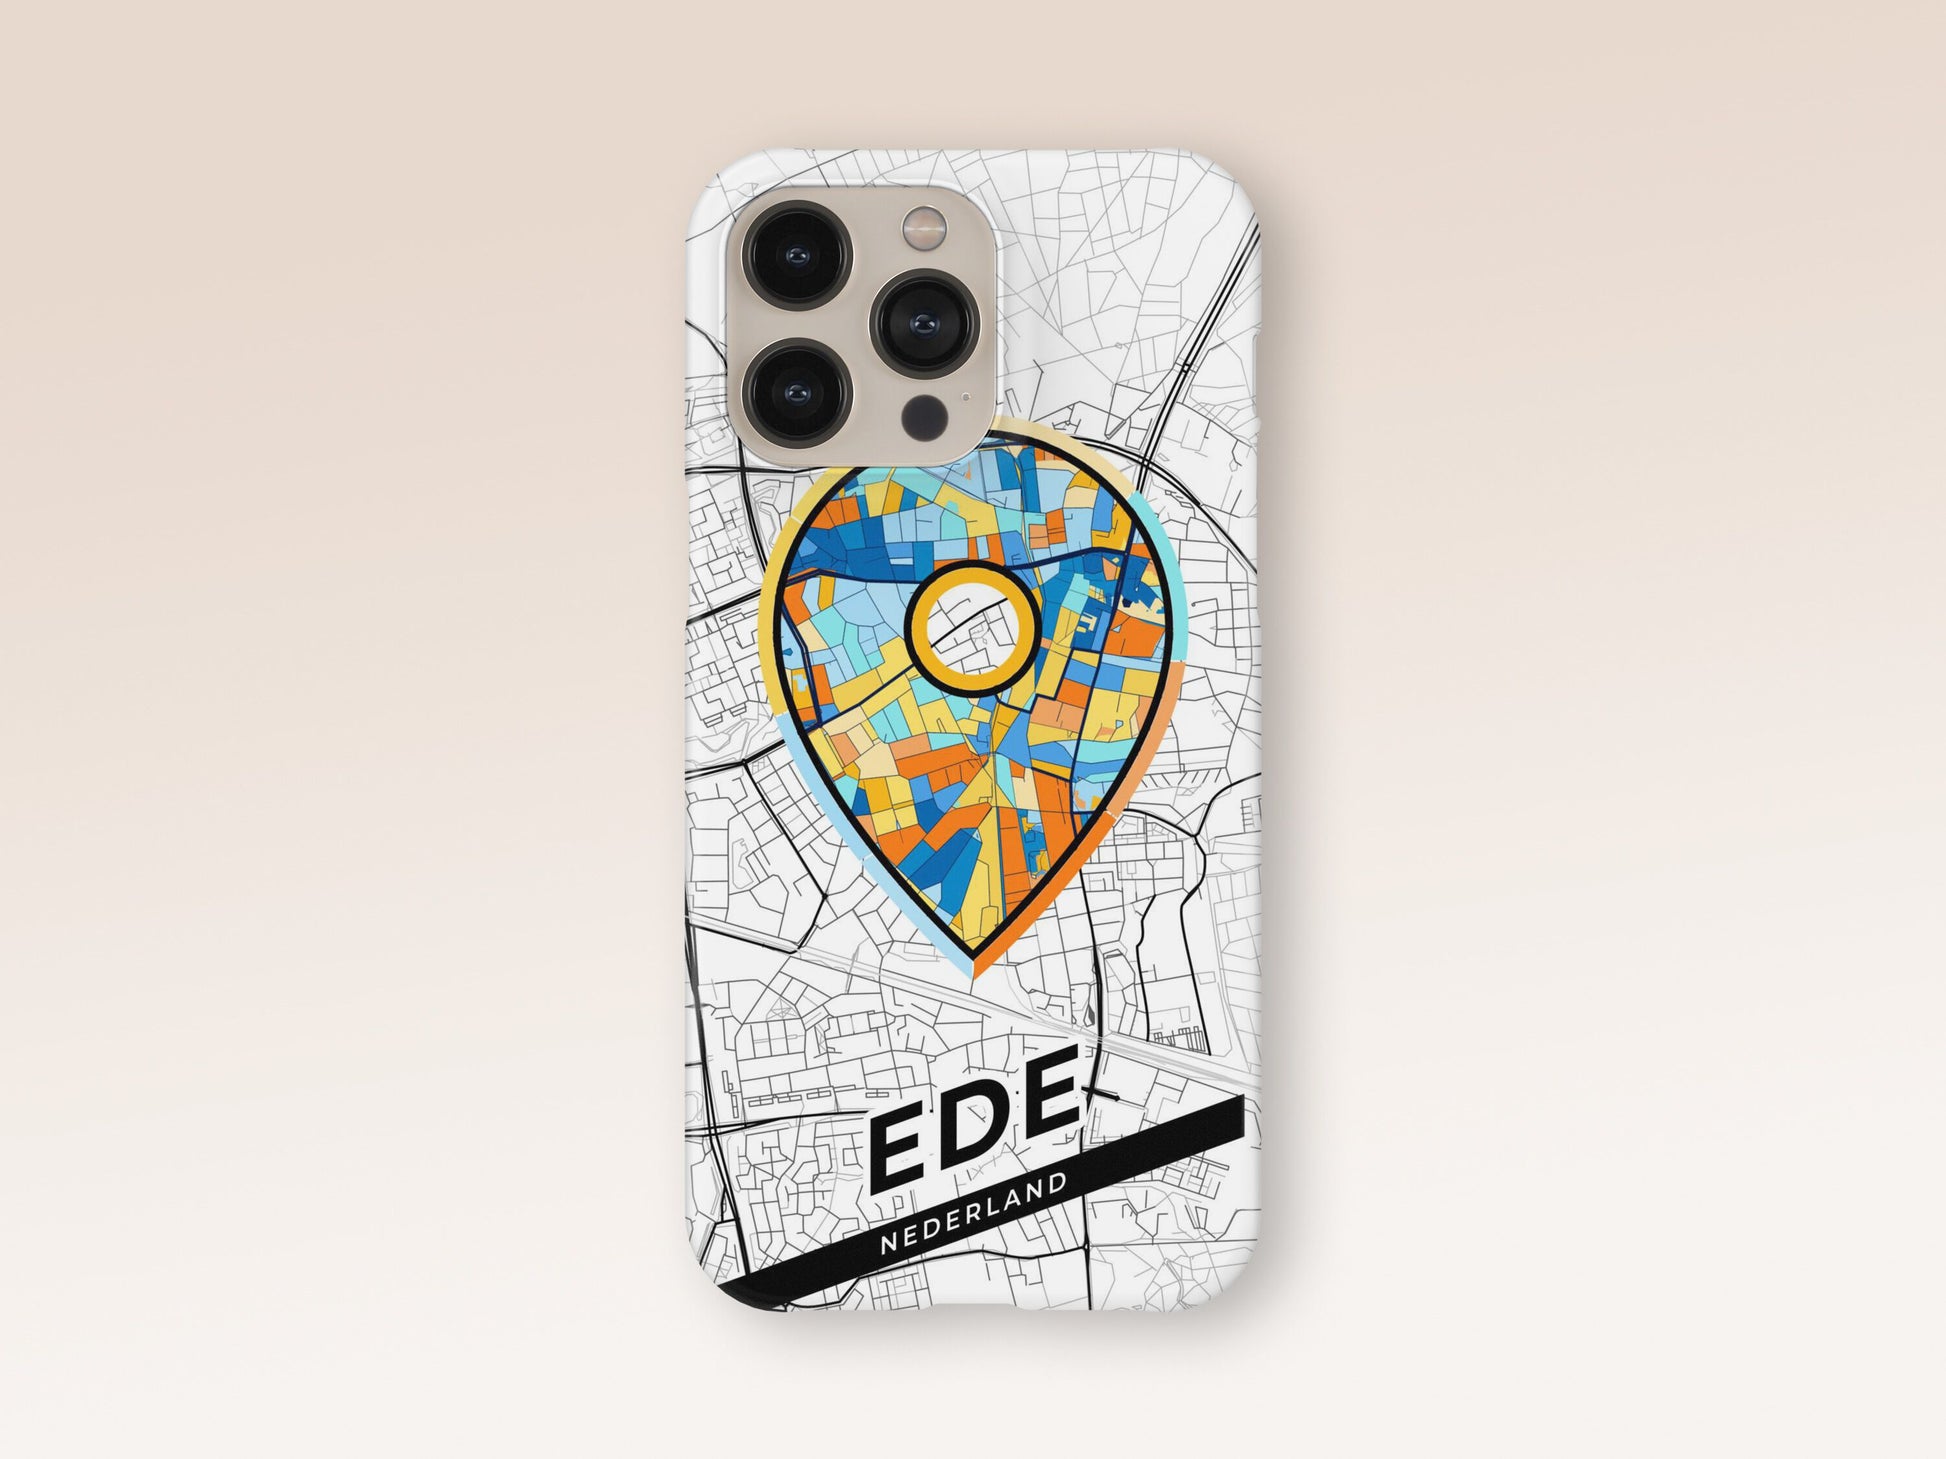 Ede Netherlands slim phone case with colorful icon. Birthday, wedding or housewarming gift. Couple match cases. 1